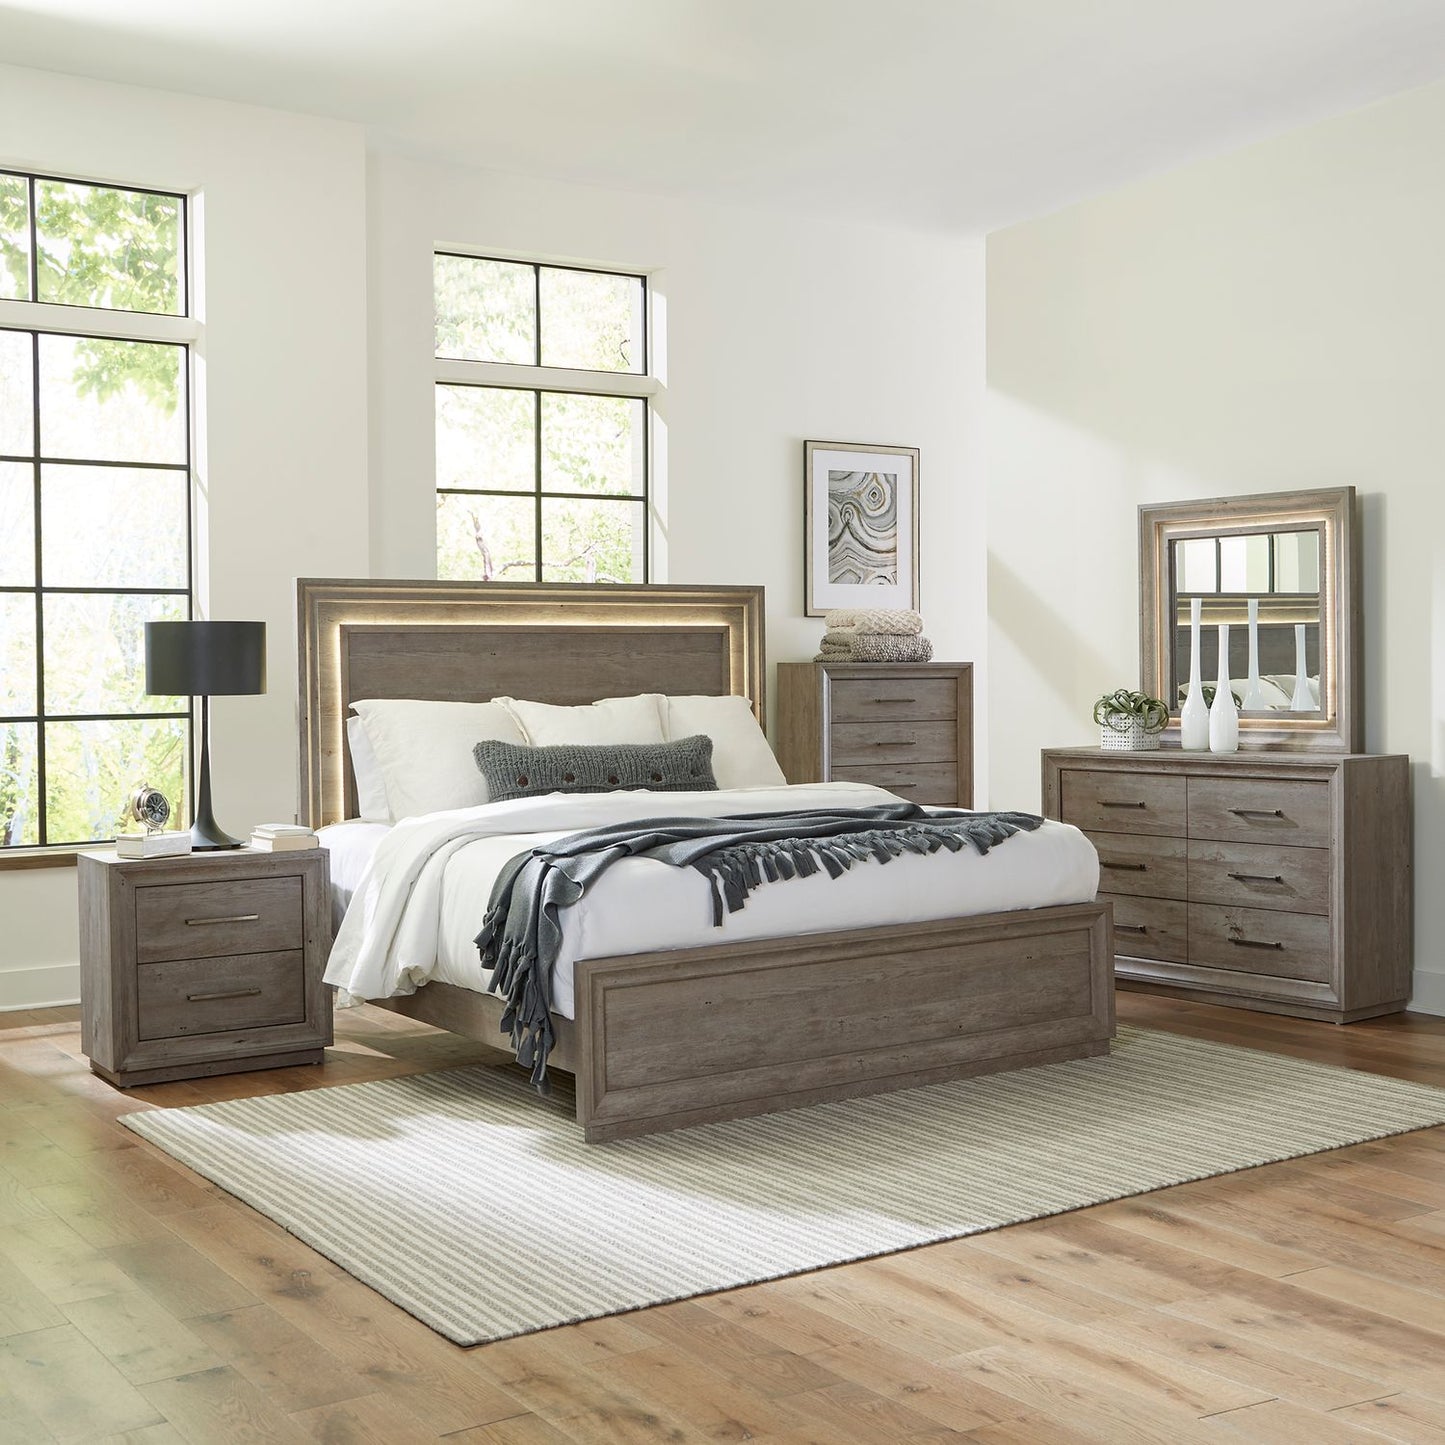 Horizons - King Panel Bed, Dresser & Mirror, Chest, Night Stand